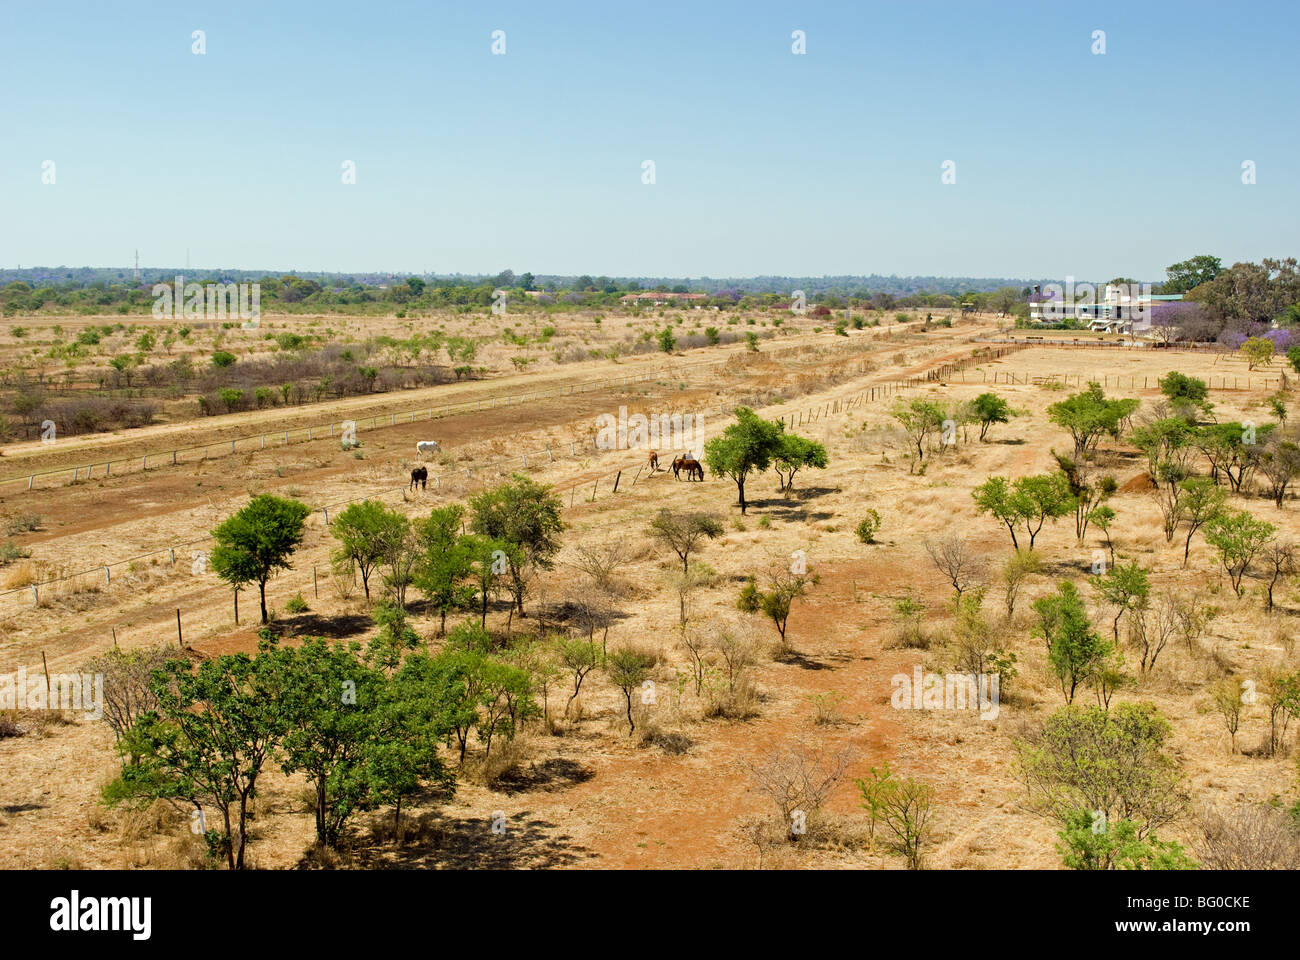 View of Ascot racecourse in Bulawayo, Zimbabwe. The famous course built in the 1890's was closed in 2001. Stock Photo